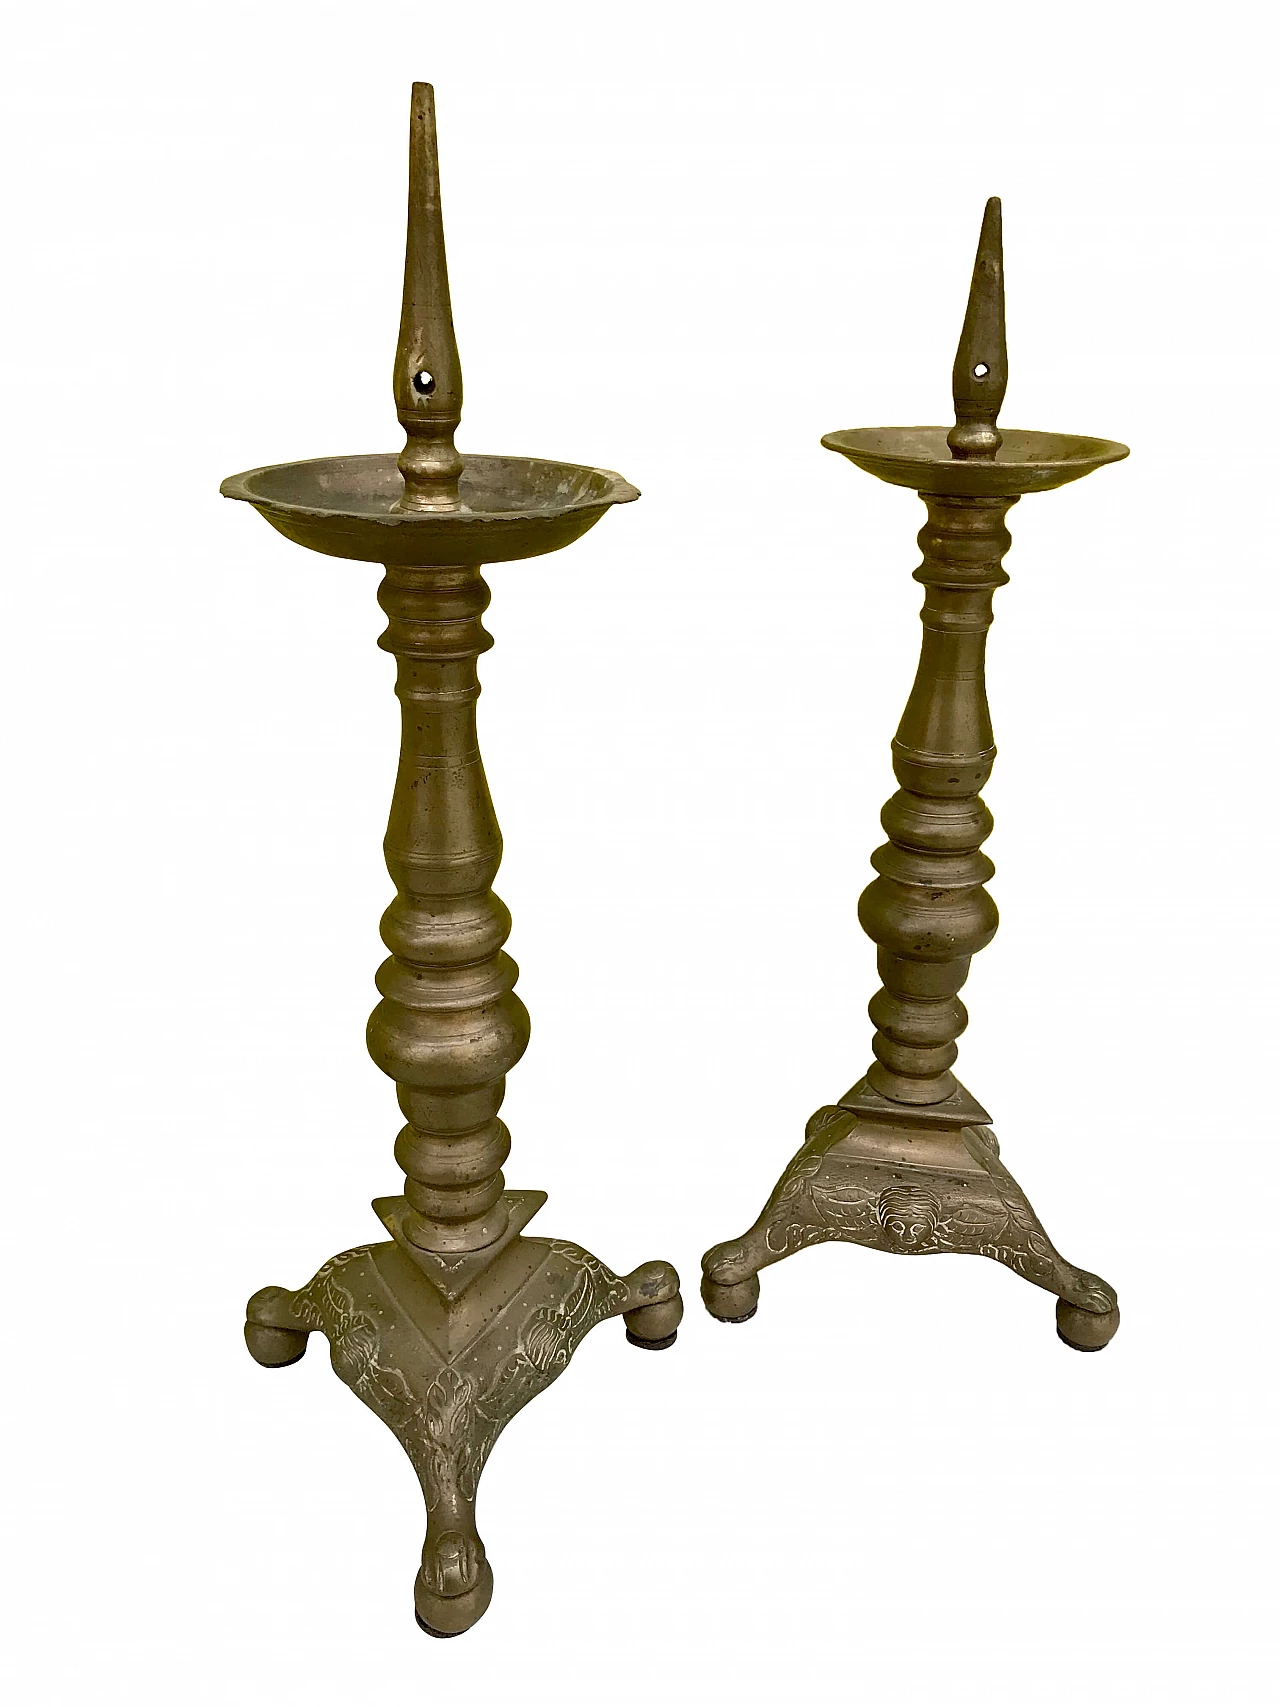 Pair of Italian candlesticks or torch holders in bronze, 17th century 1167972